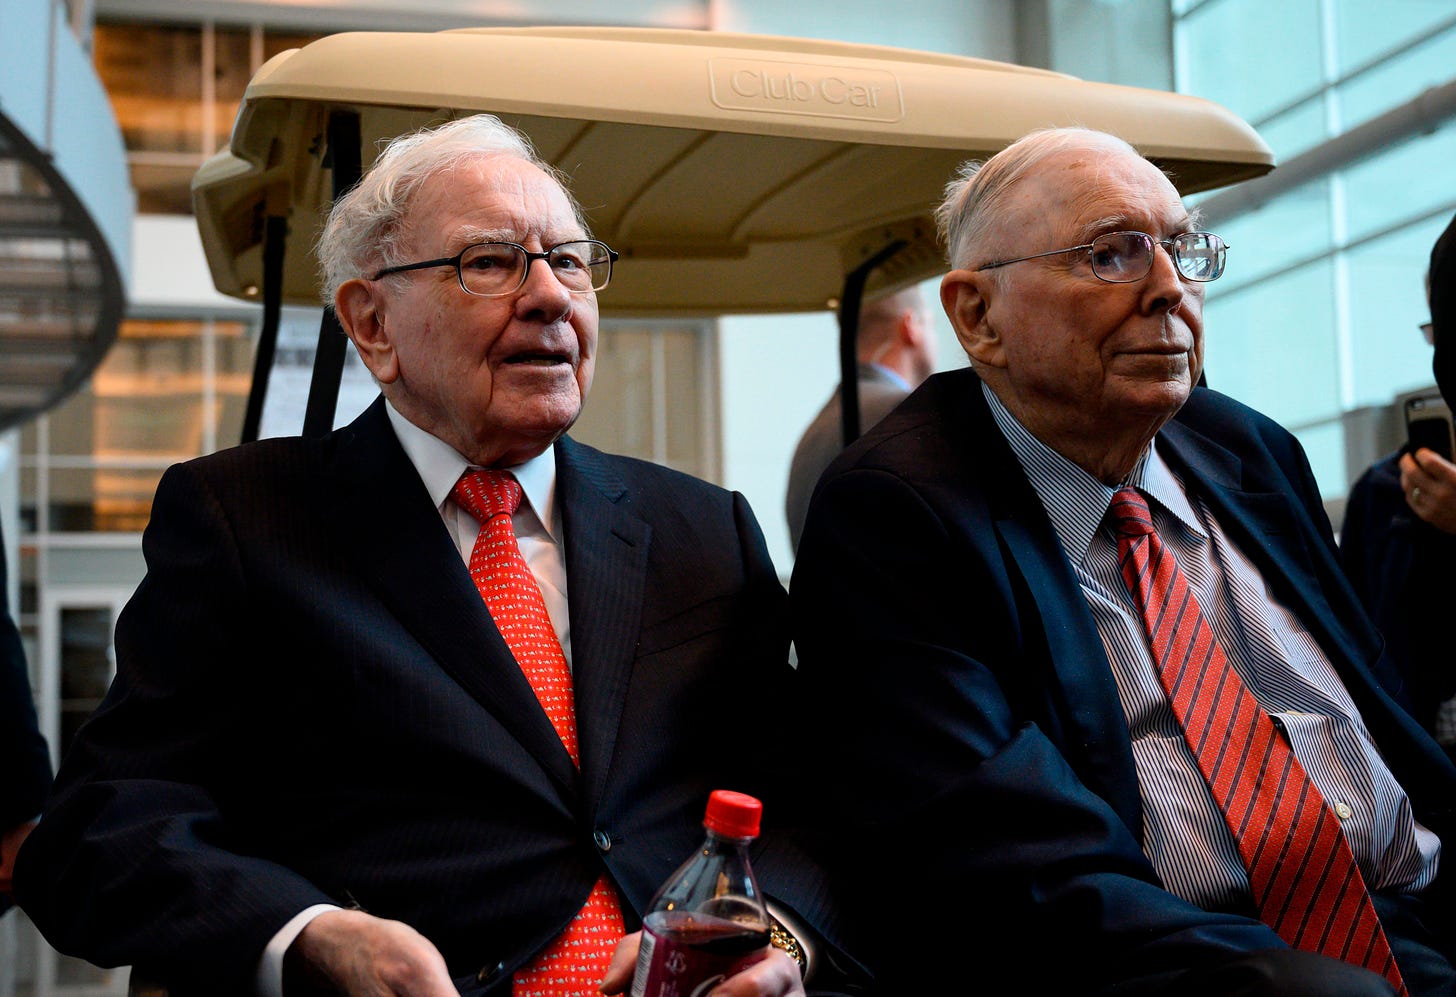 Buffett and Munger: This is 'what we really wanted' more than money